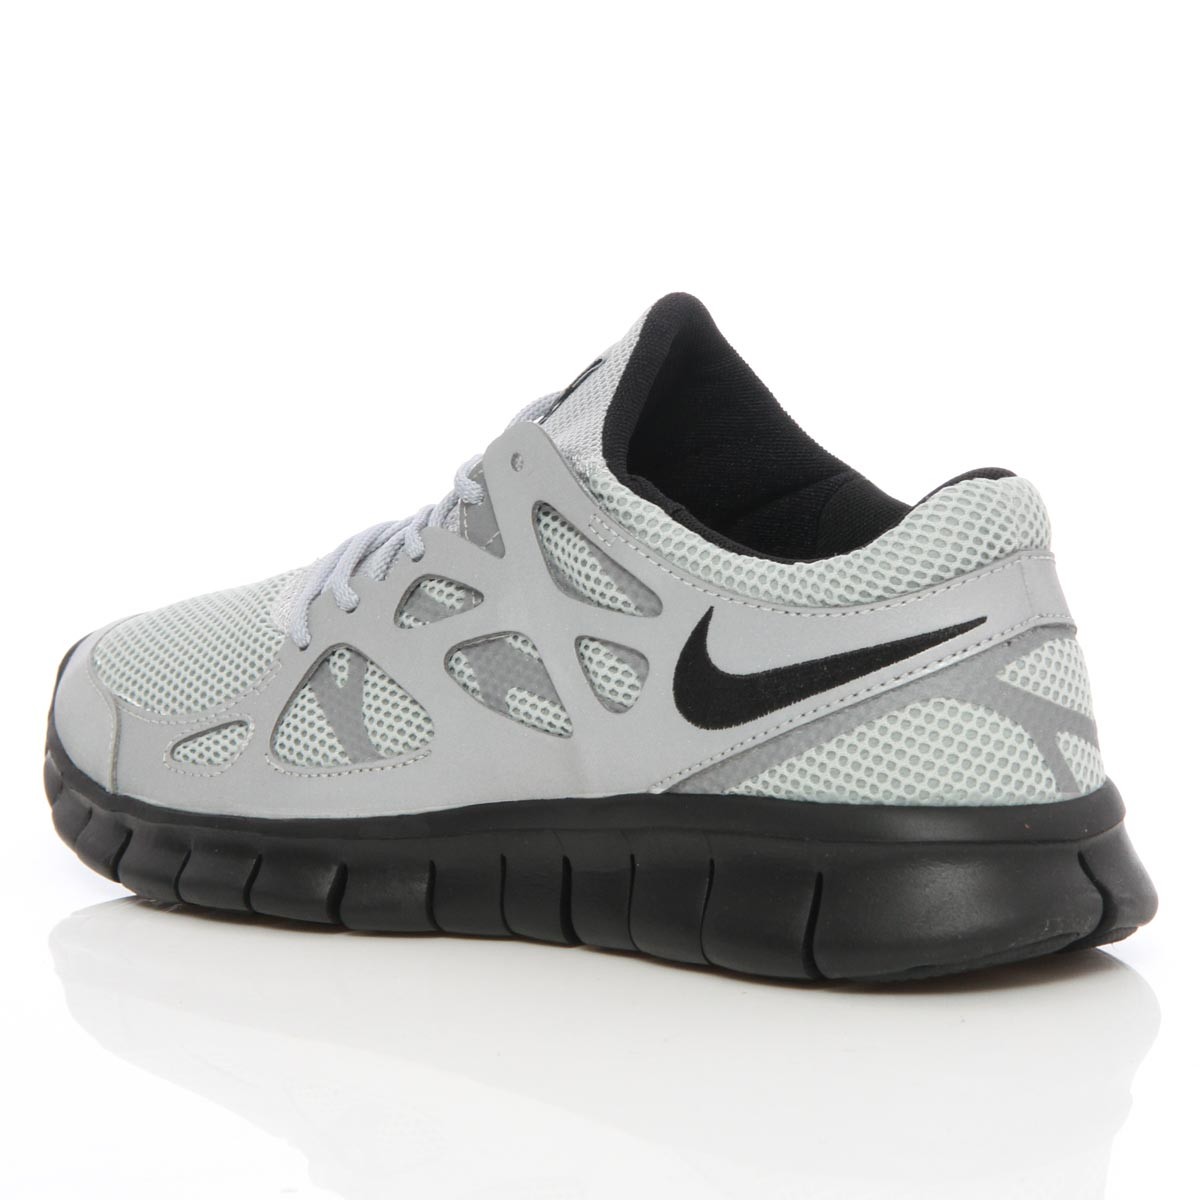 Nike Free Run 2 Metallic Silver - Where To Buy - undefined | The 